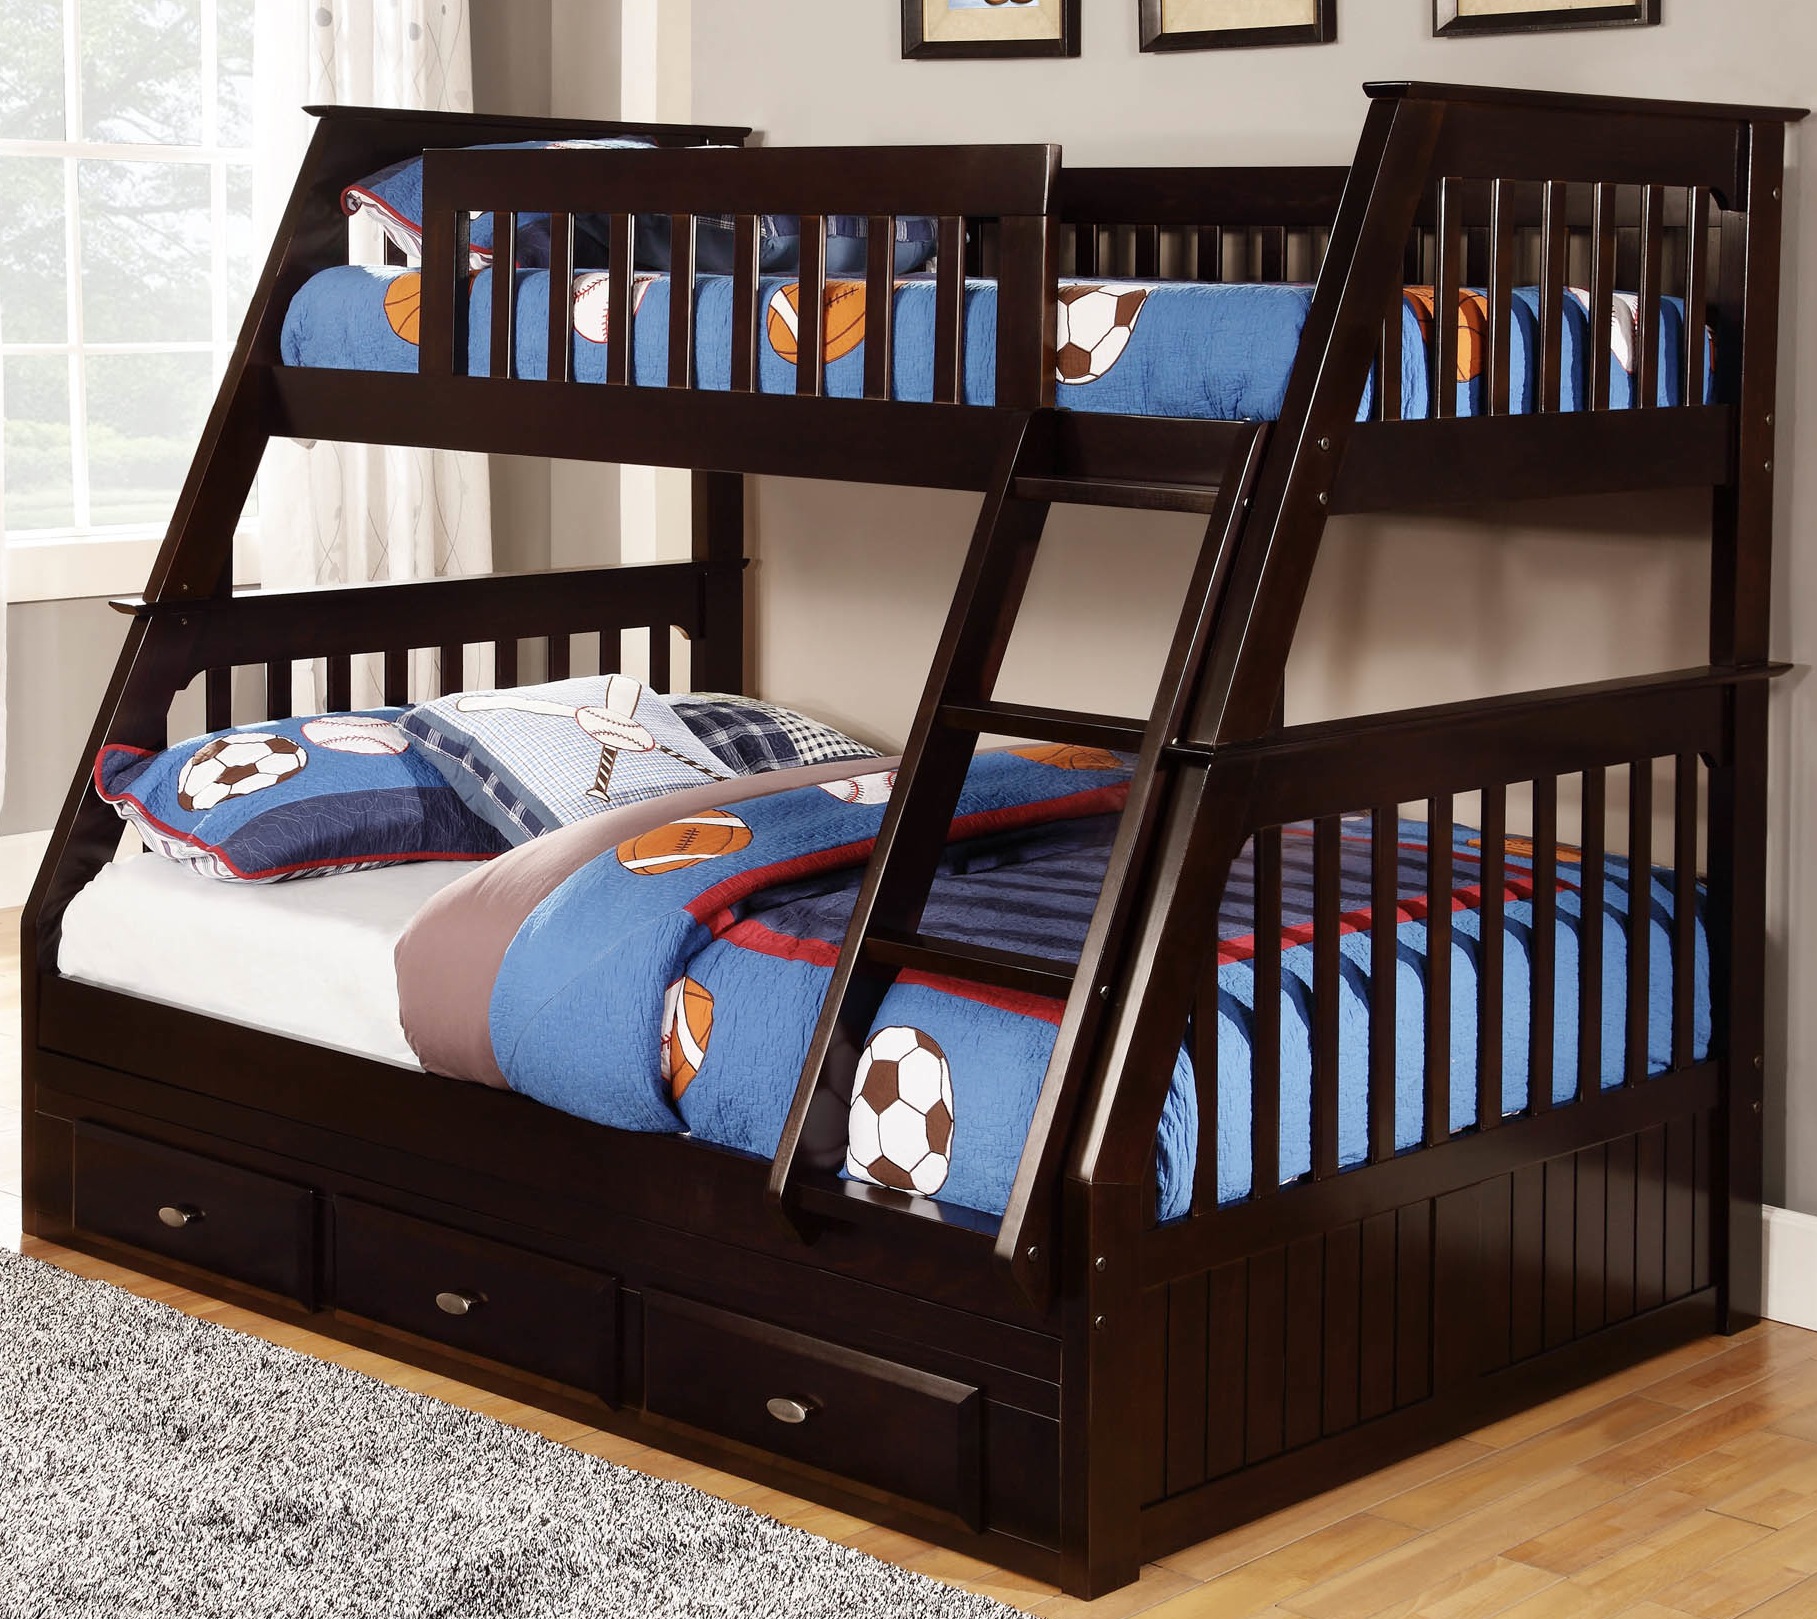 Espresso Mission Bunk Bed Kfs S, Full Size And Twin Size Bunk Beds